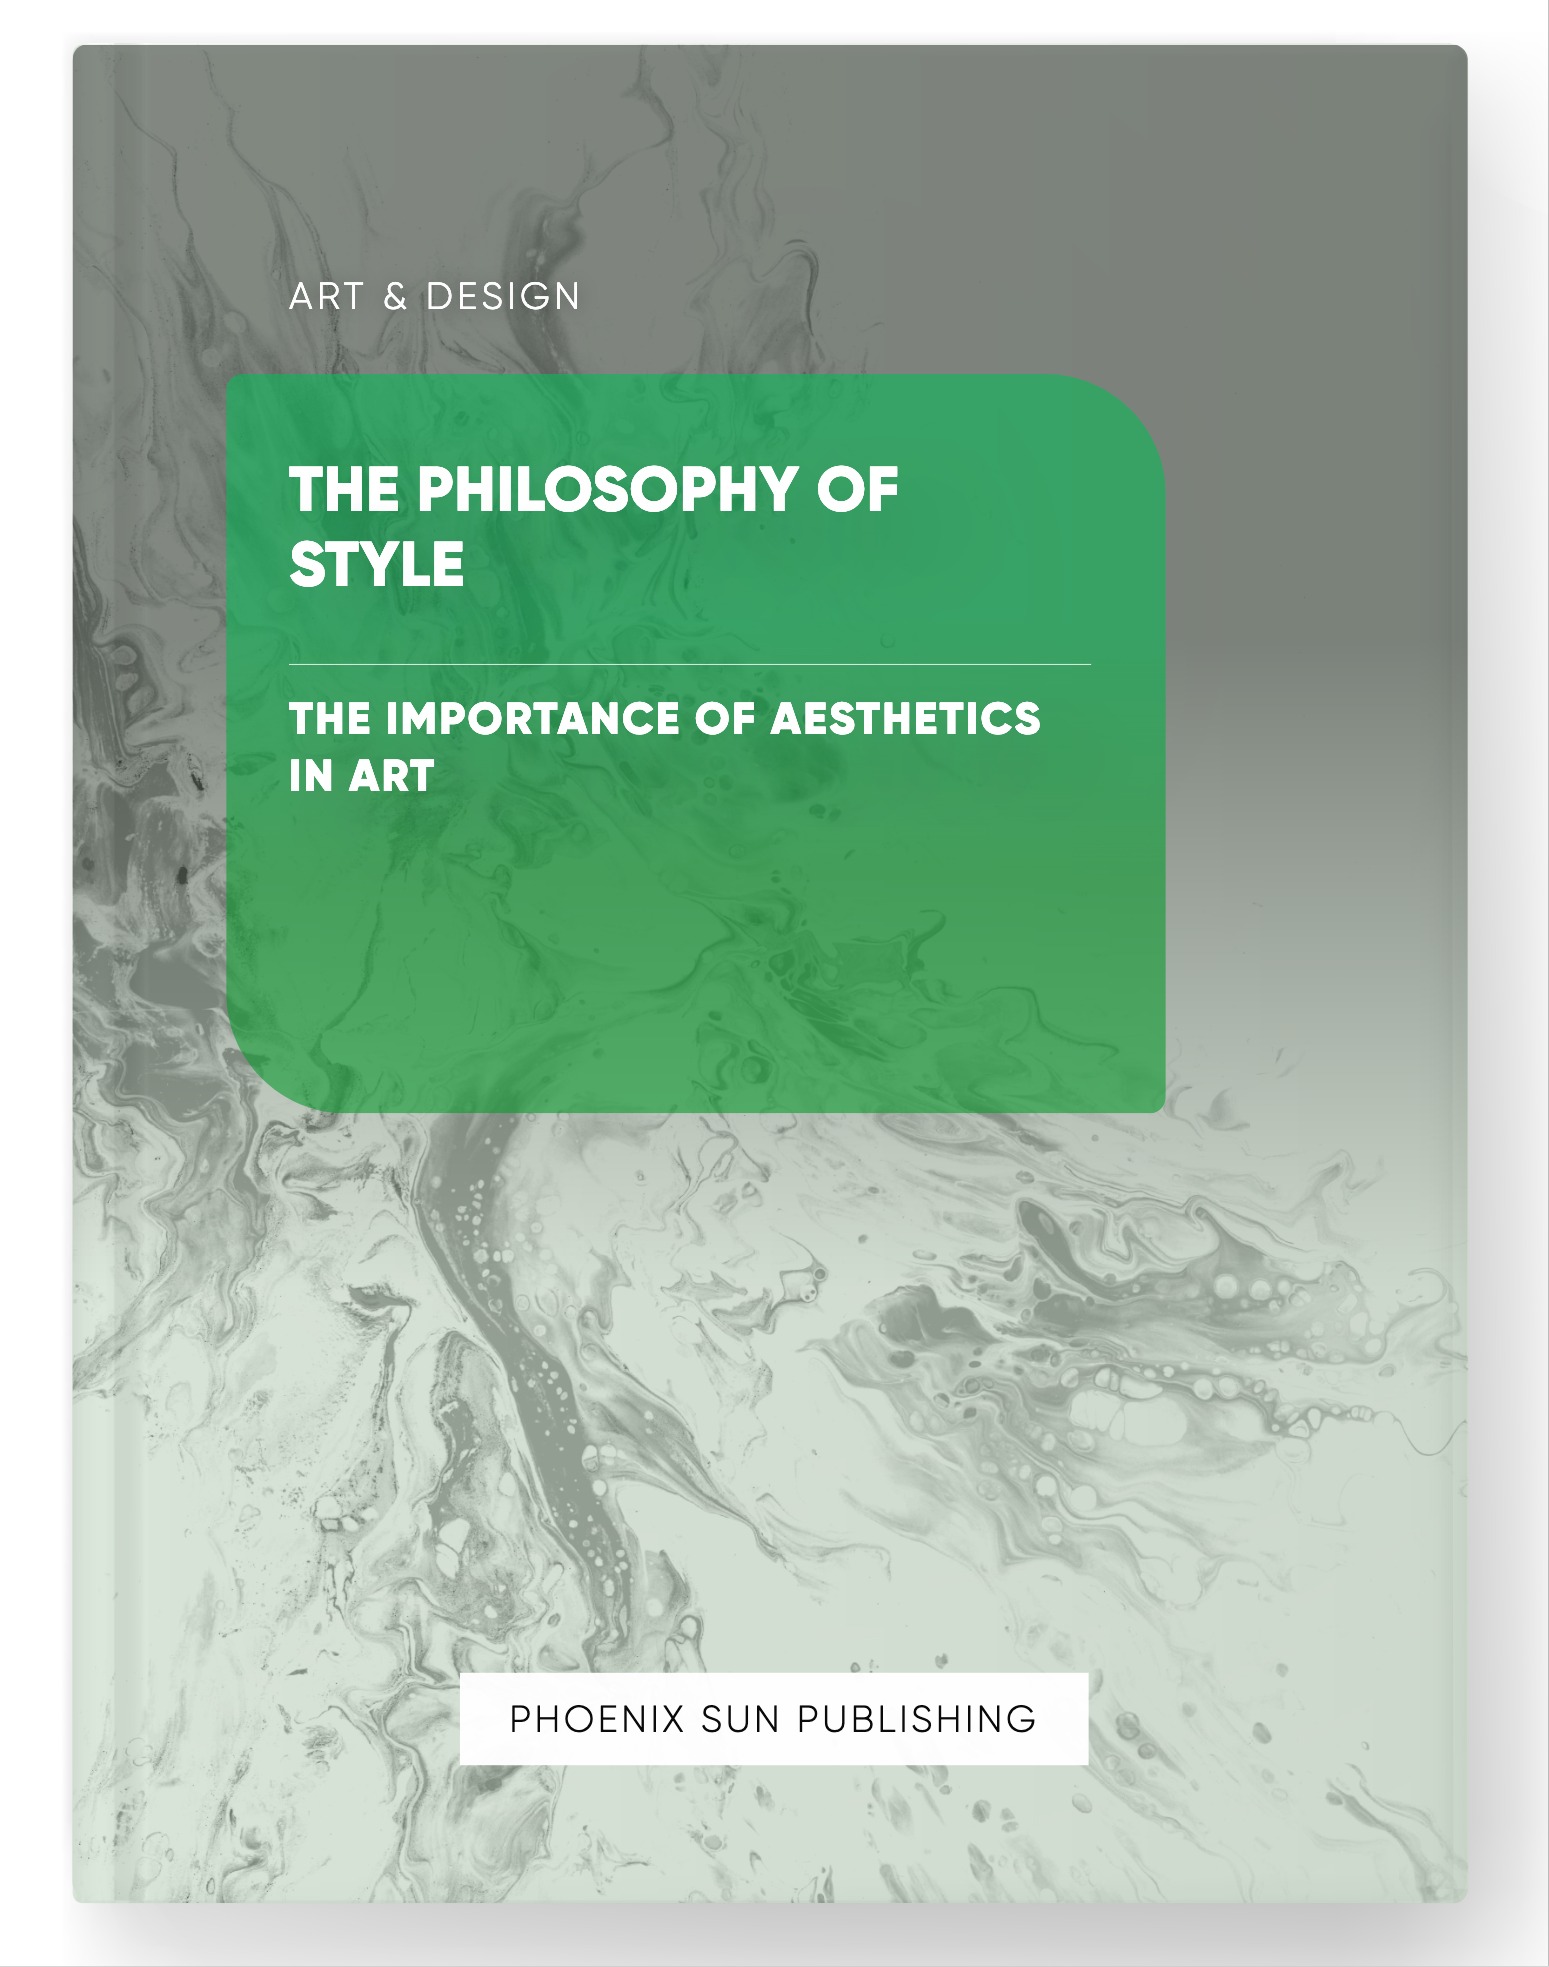 The Philosophy of Style – The Importance of Aesthetics in Art